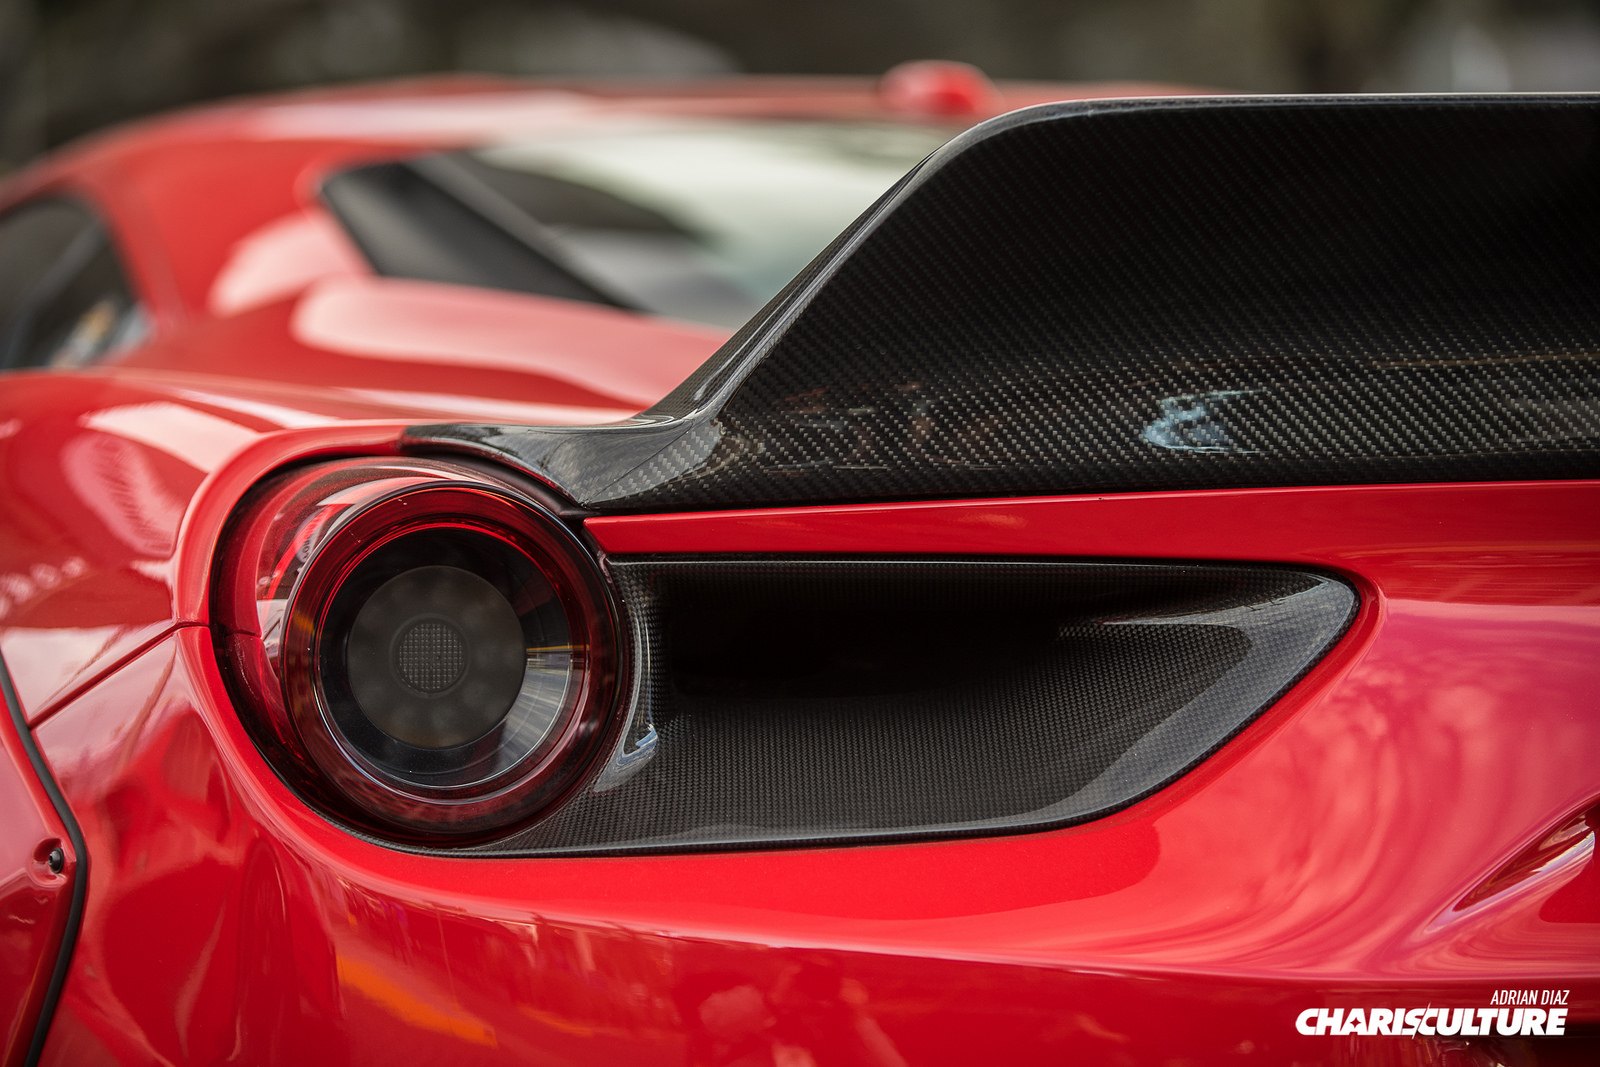 Red Ferrari 488 with Carbon Fiber Taillight Guards - Photo by The Charis Culture